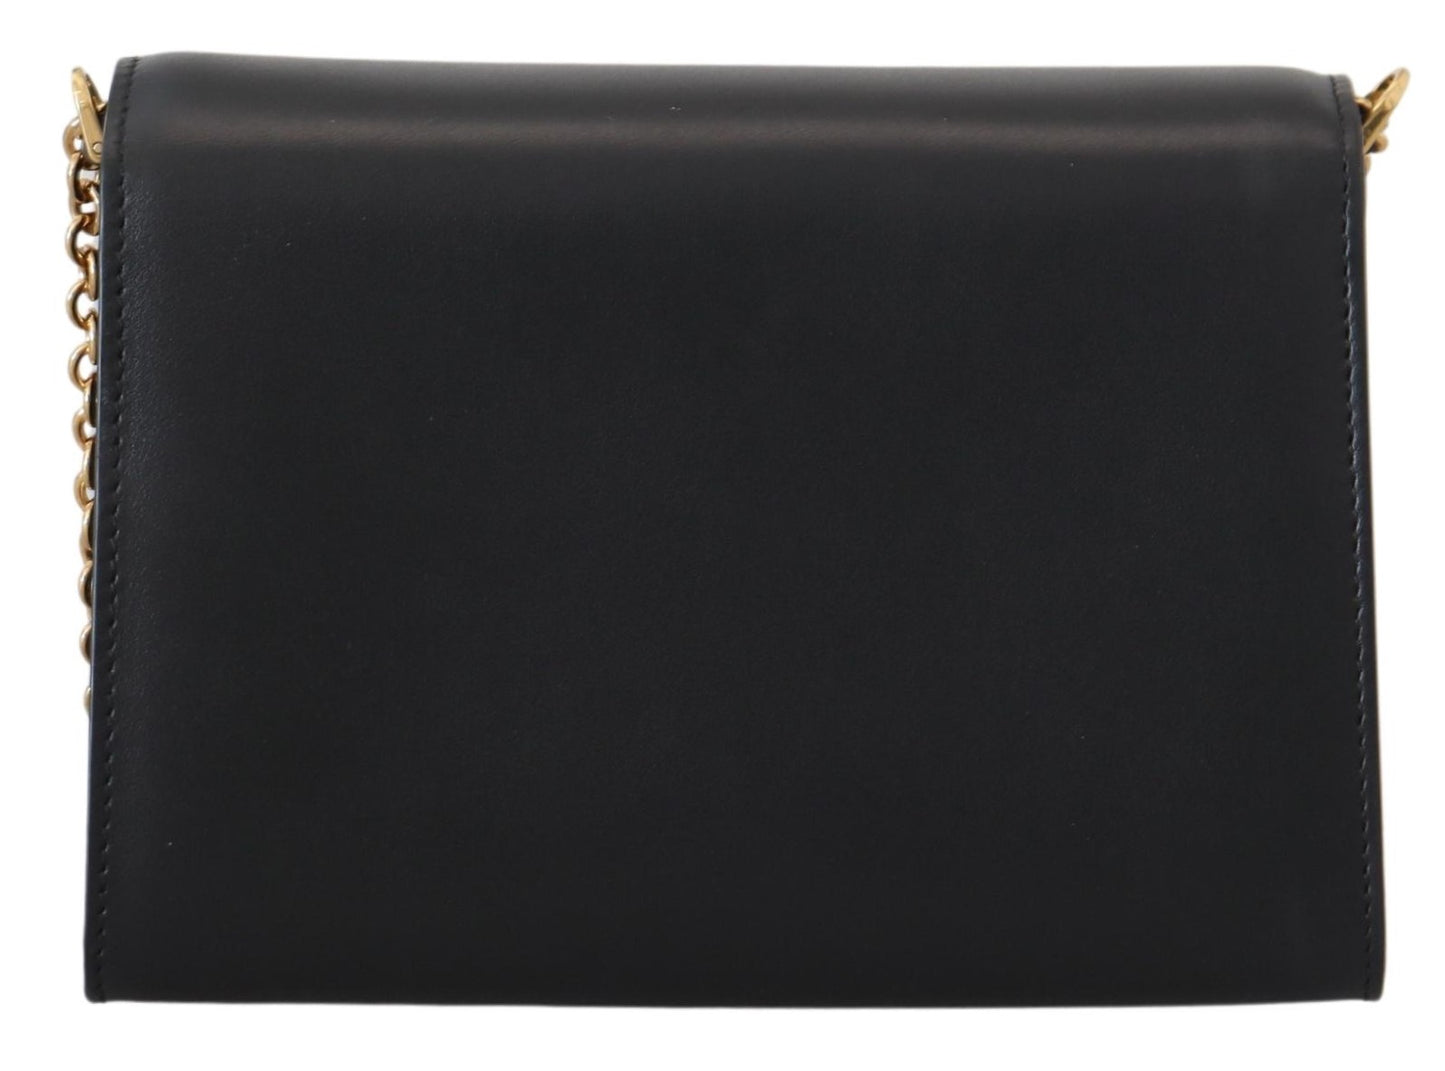 Black Small WELCOME Leather Crossbody Bag